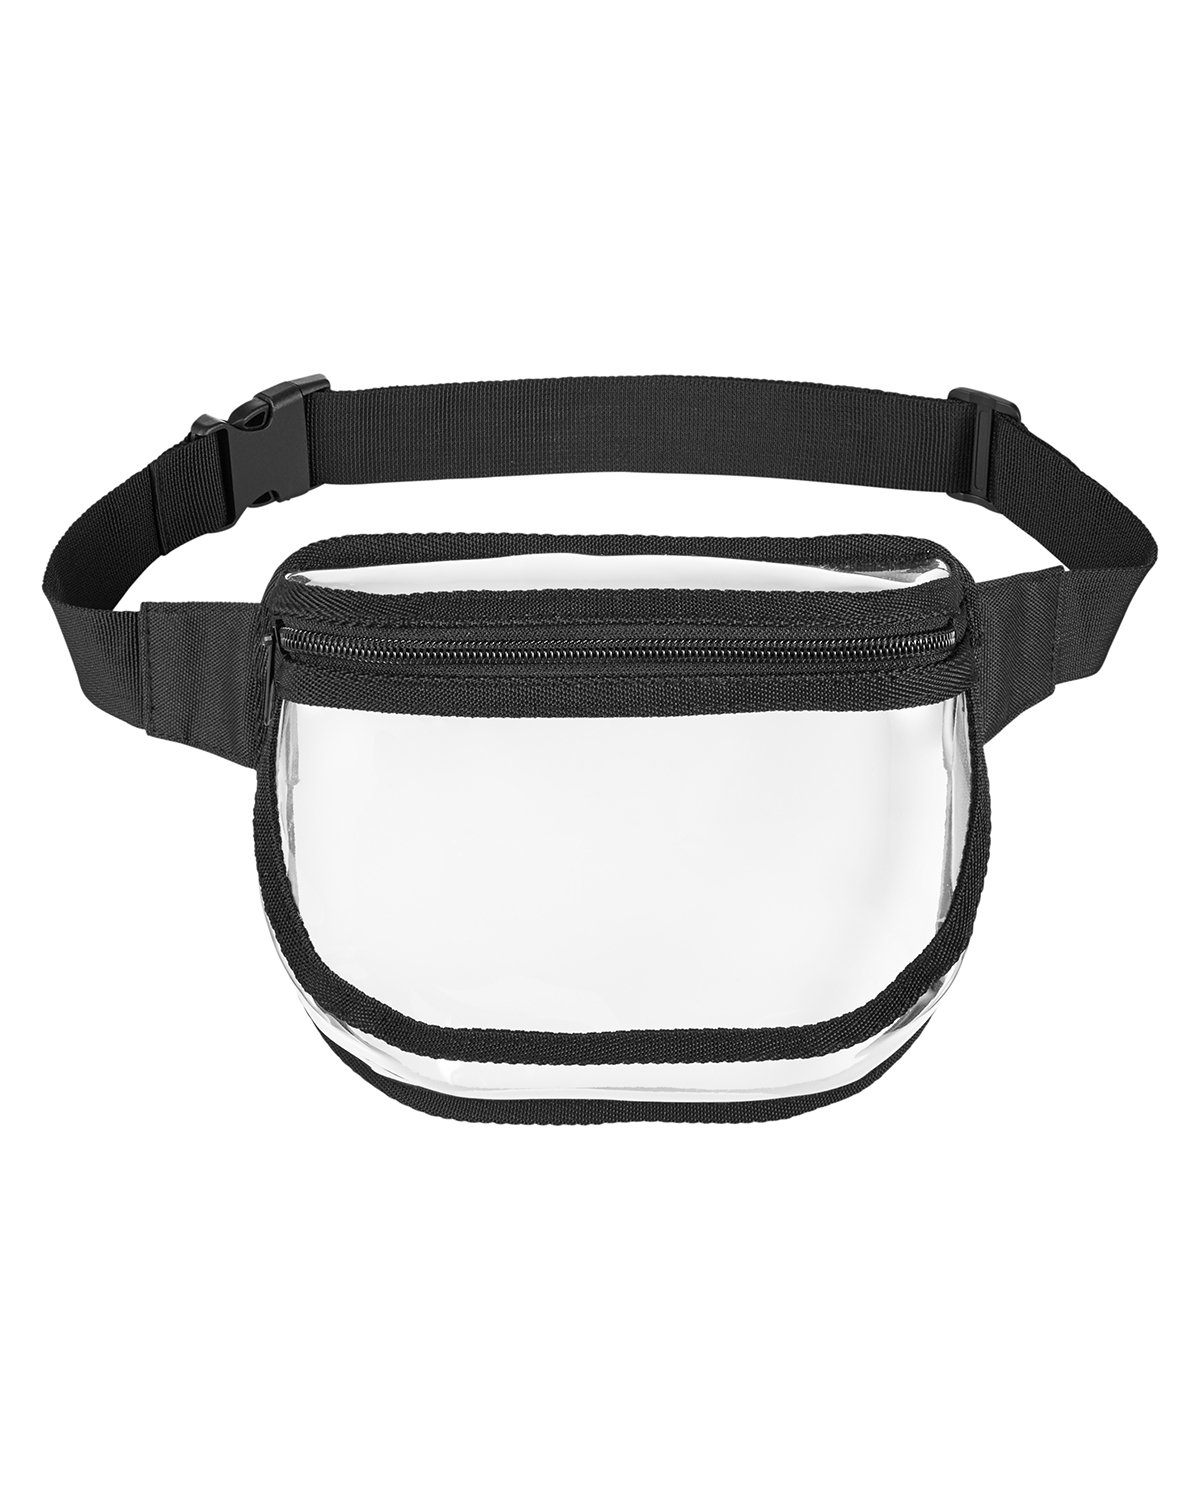 BAGedge Unisex Clear PVC Fanny Pack | alphabroder